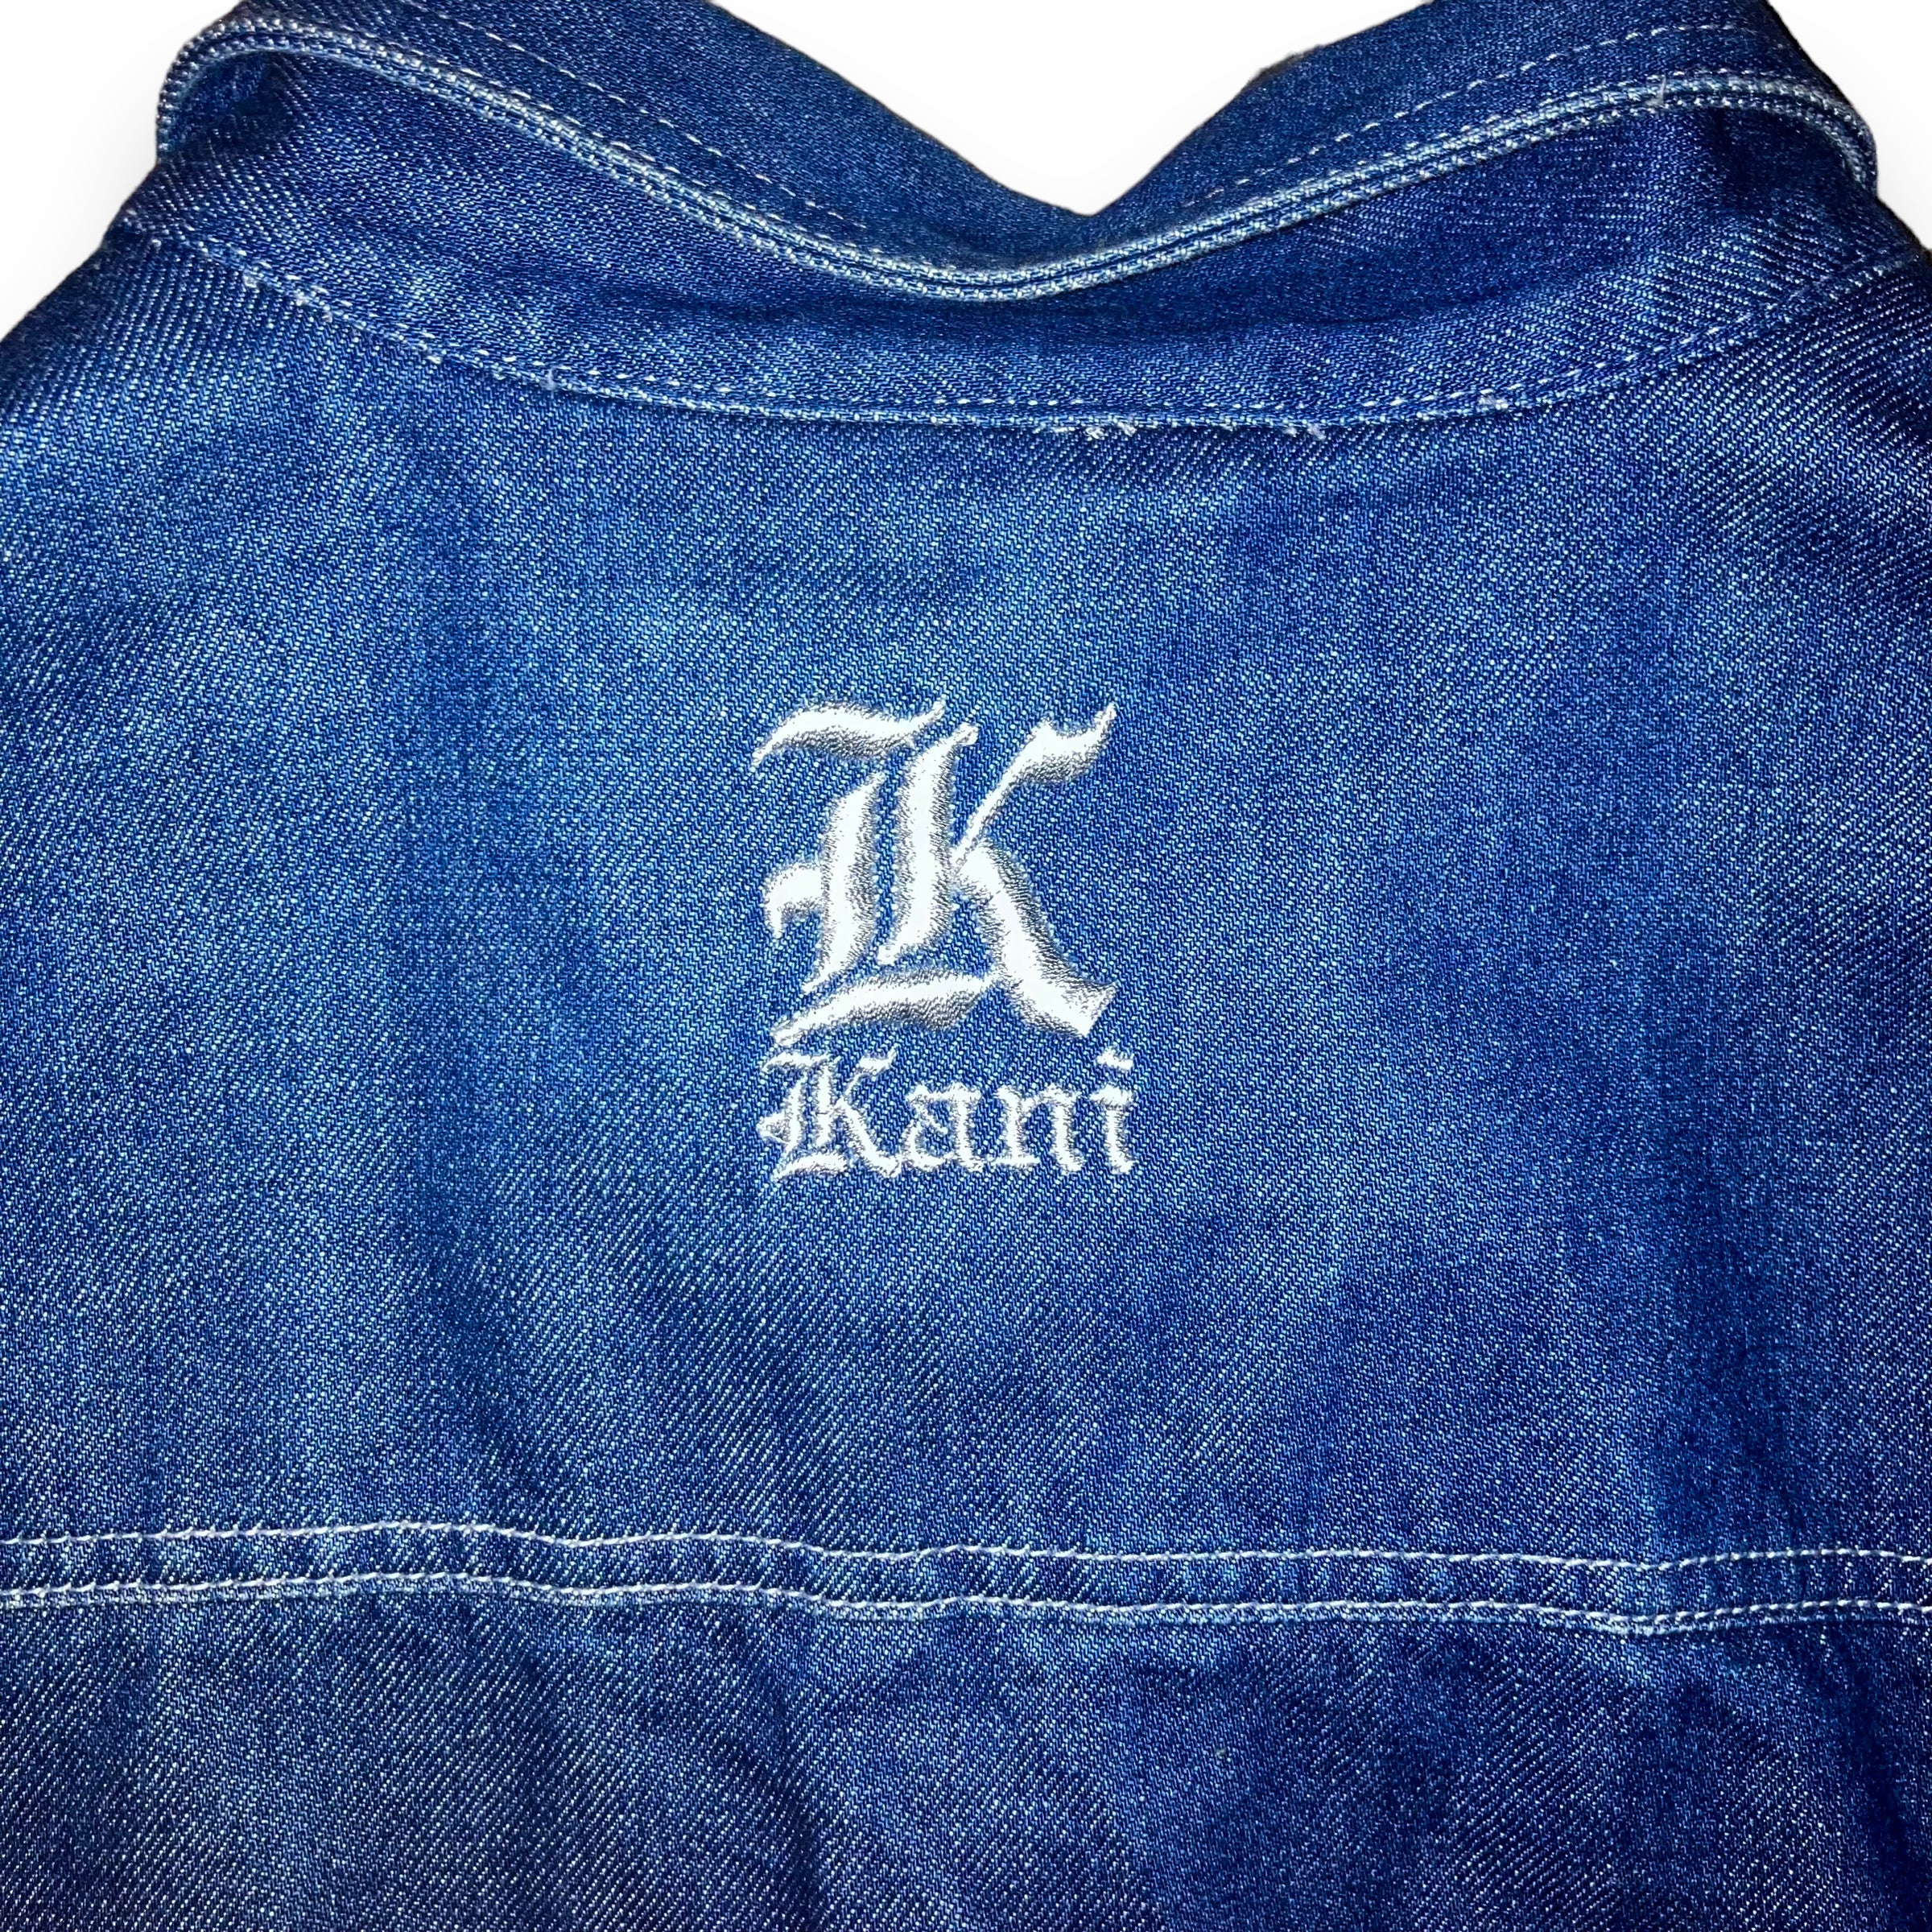 Giacca in Jeans Karl Kani South Central  (XL)